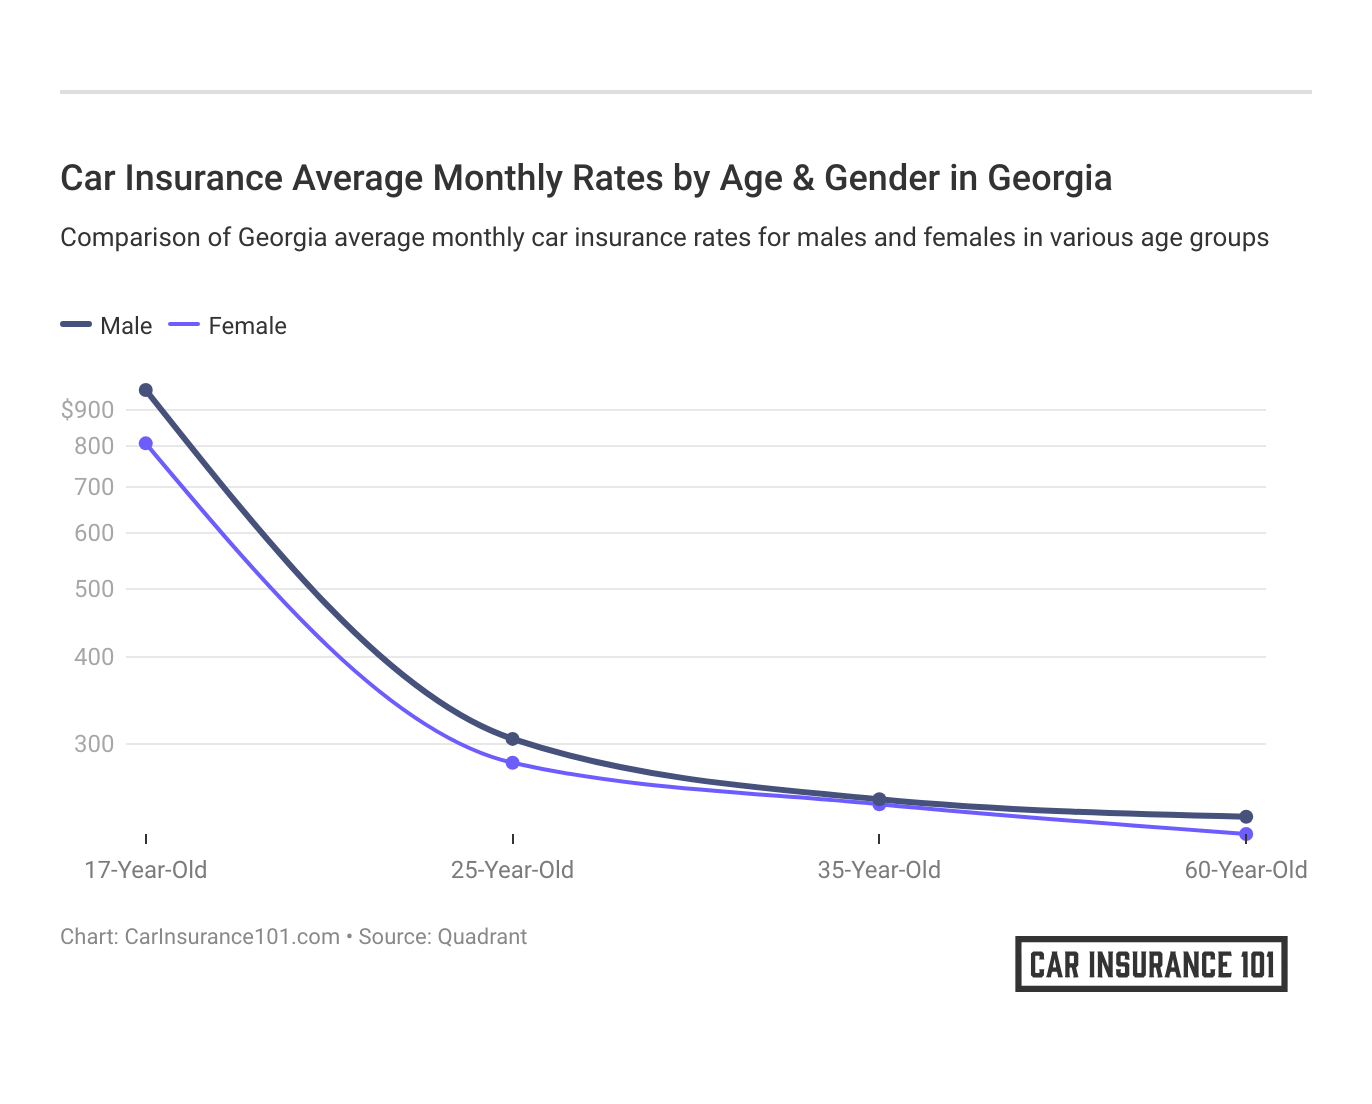 <h3>Car Insurance Average Monthly Rates by Age & Gender in Georgia</h3>